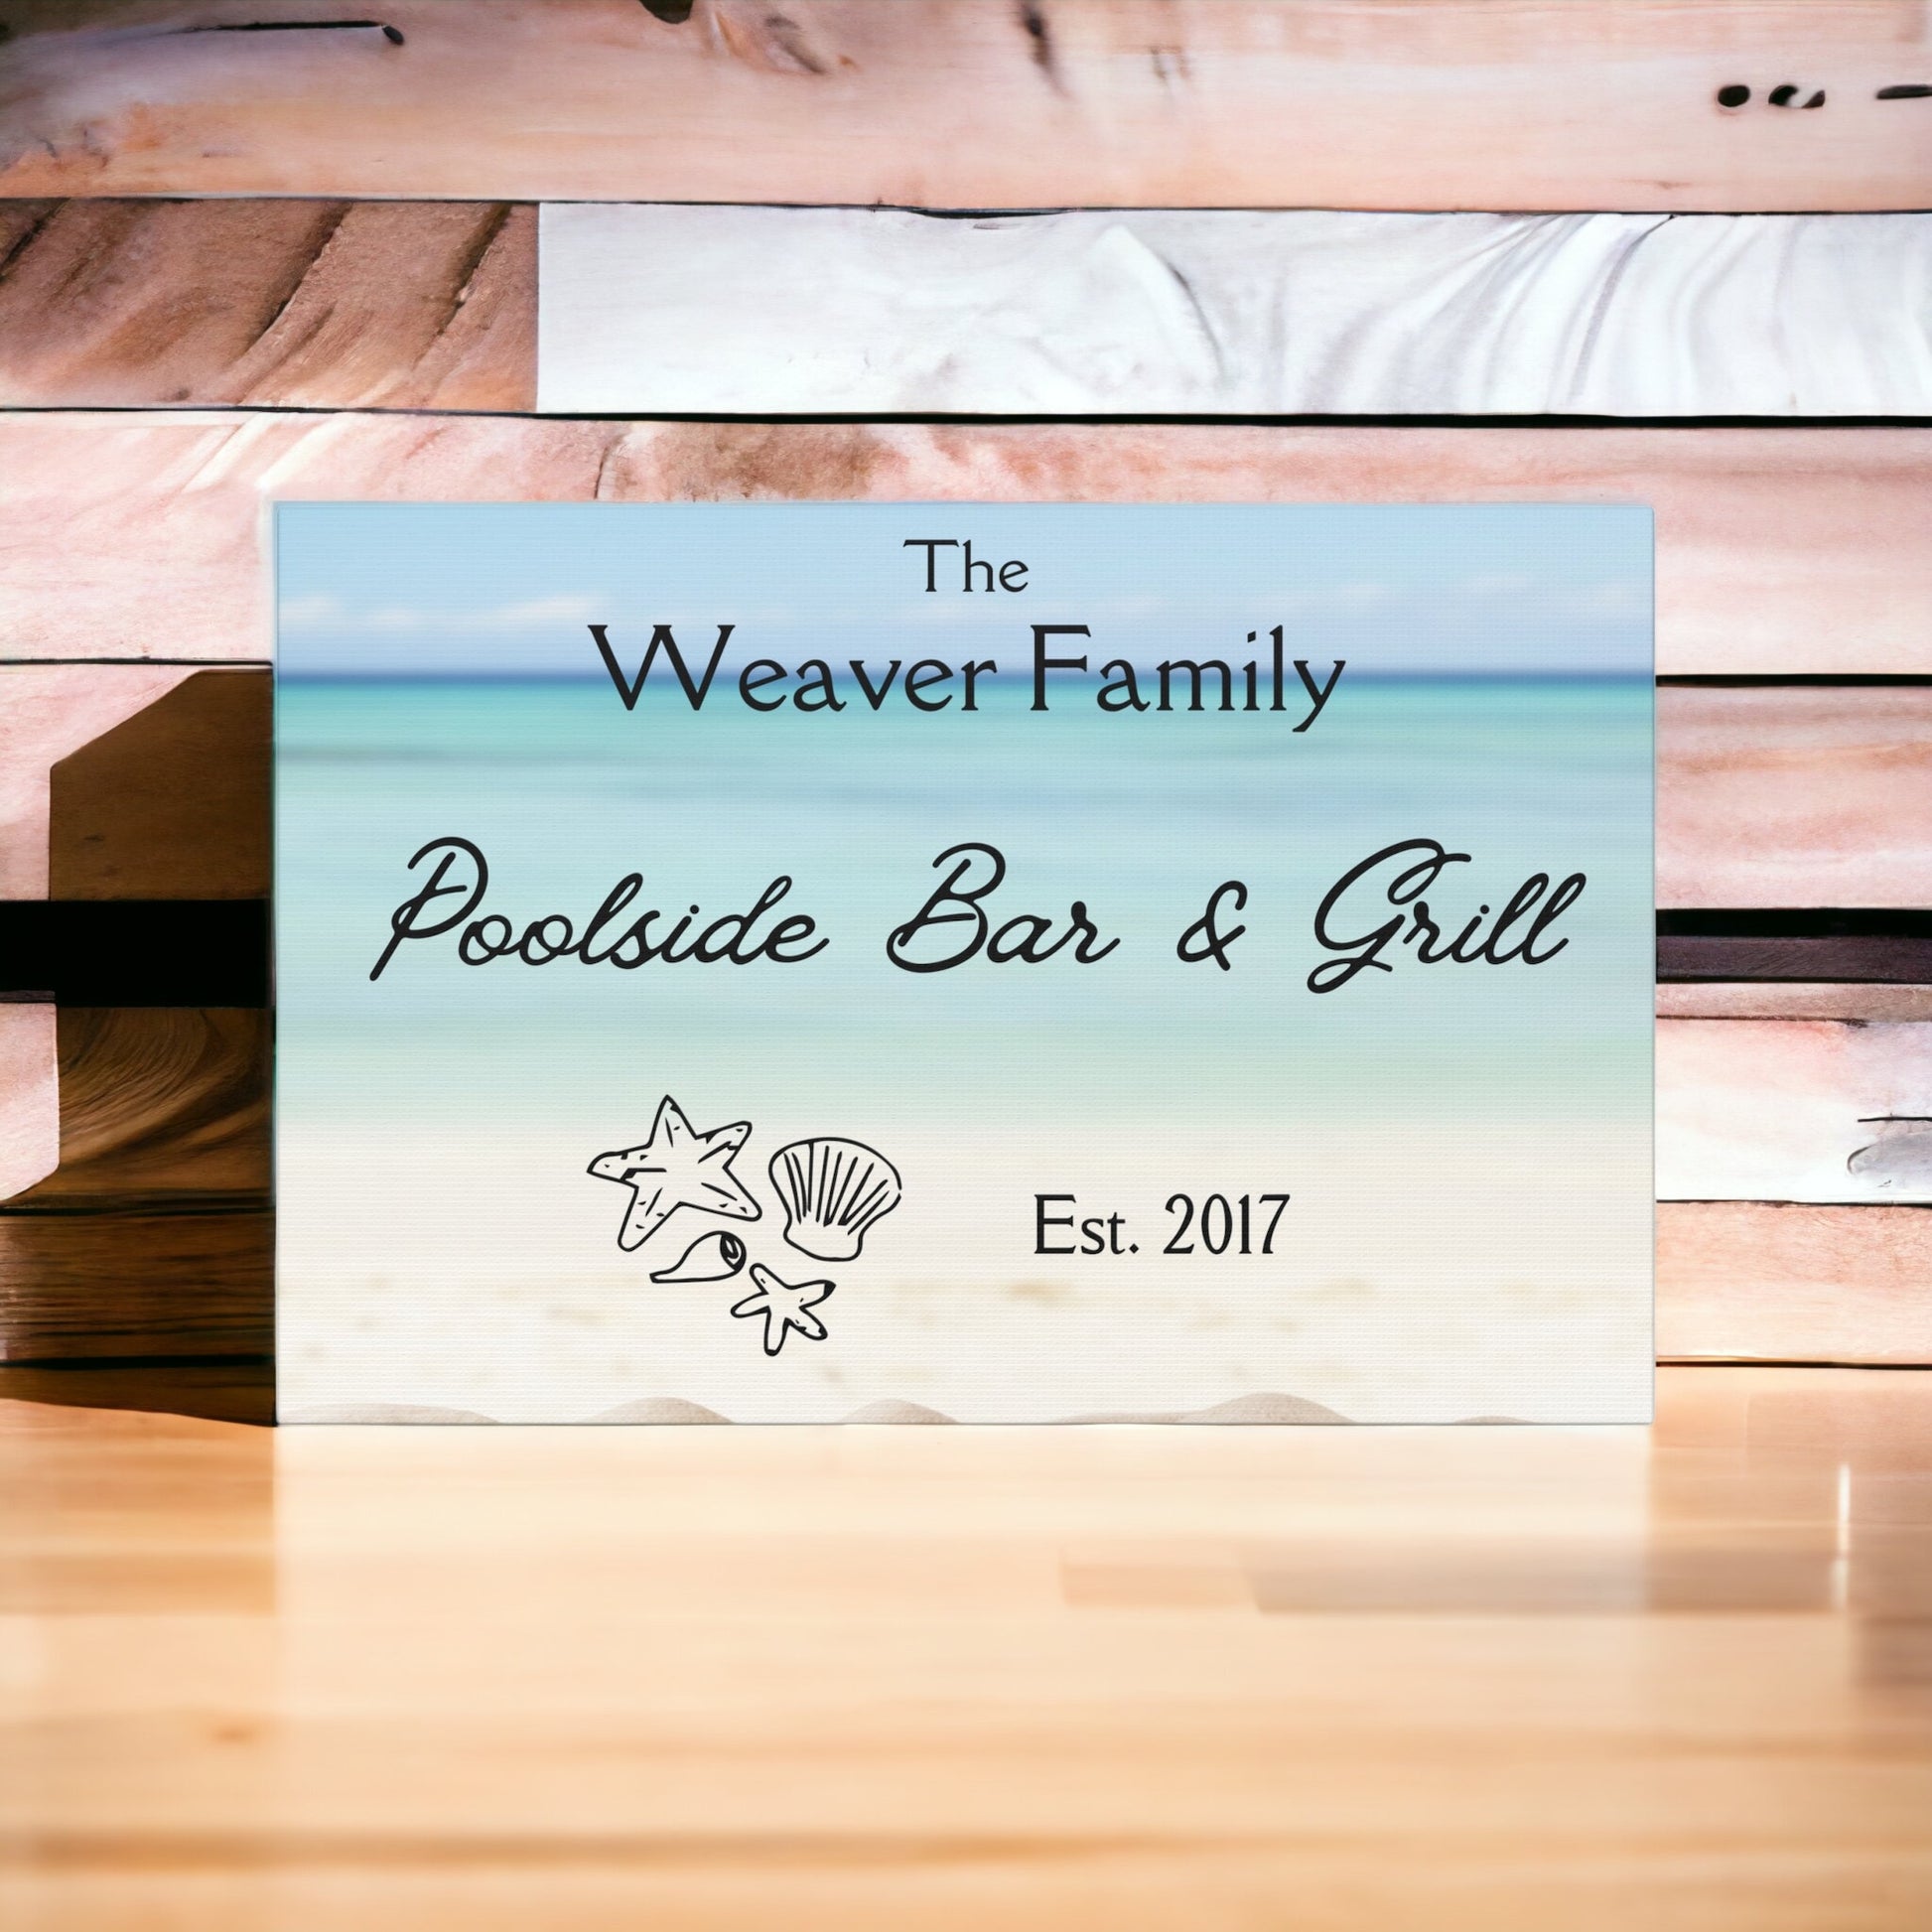 Custom "Family Poolside Bar & Grill" Wall Art - Weave Got Gifts - Unique Gifts You Won’t Find Anywhere Else!